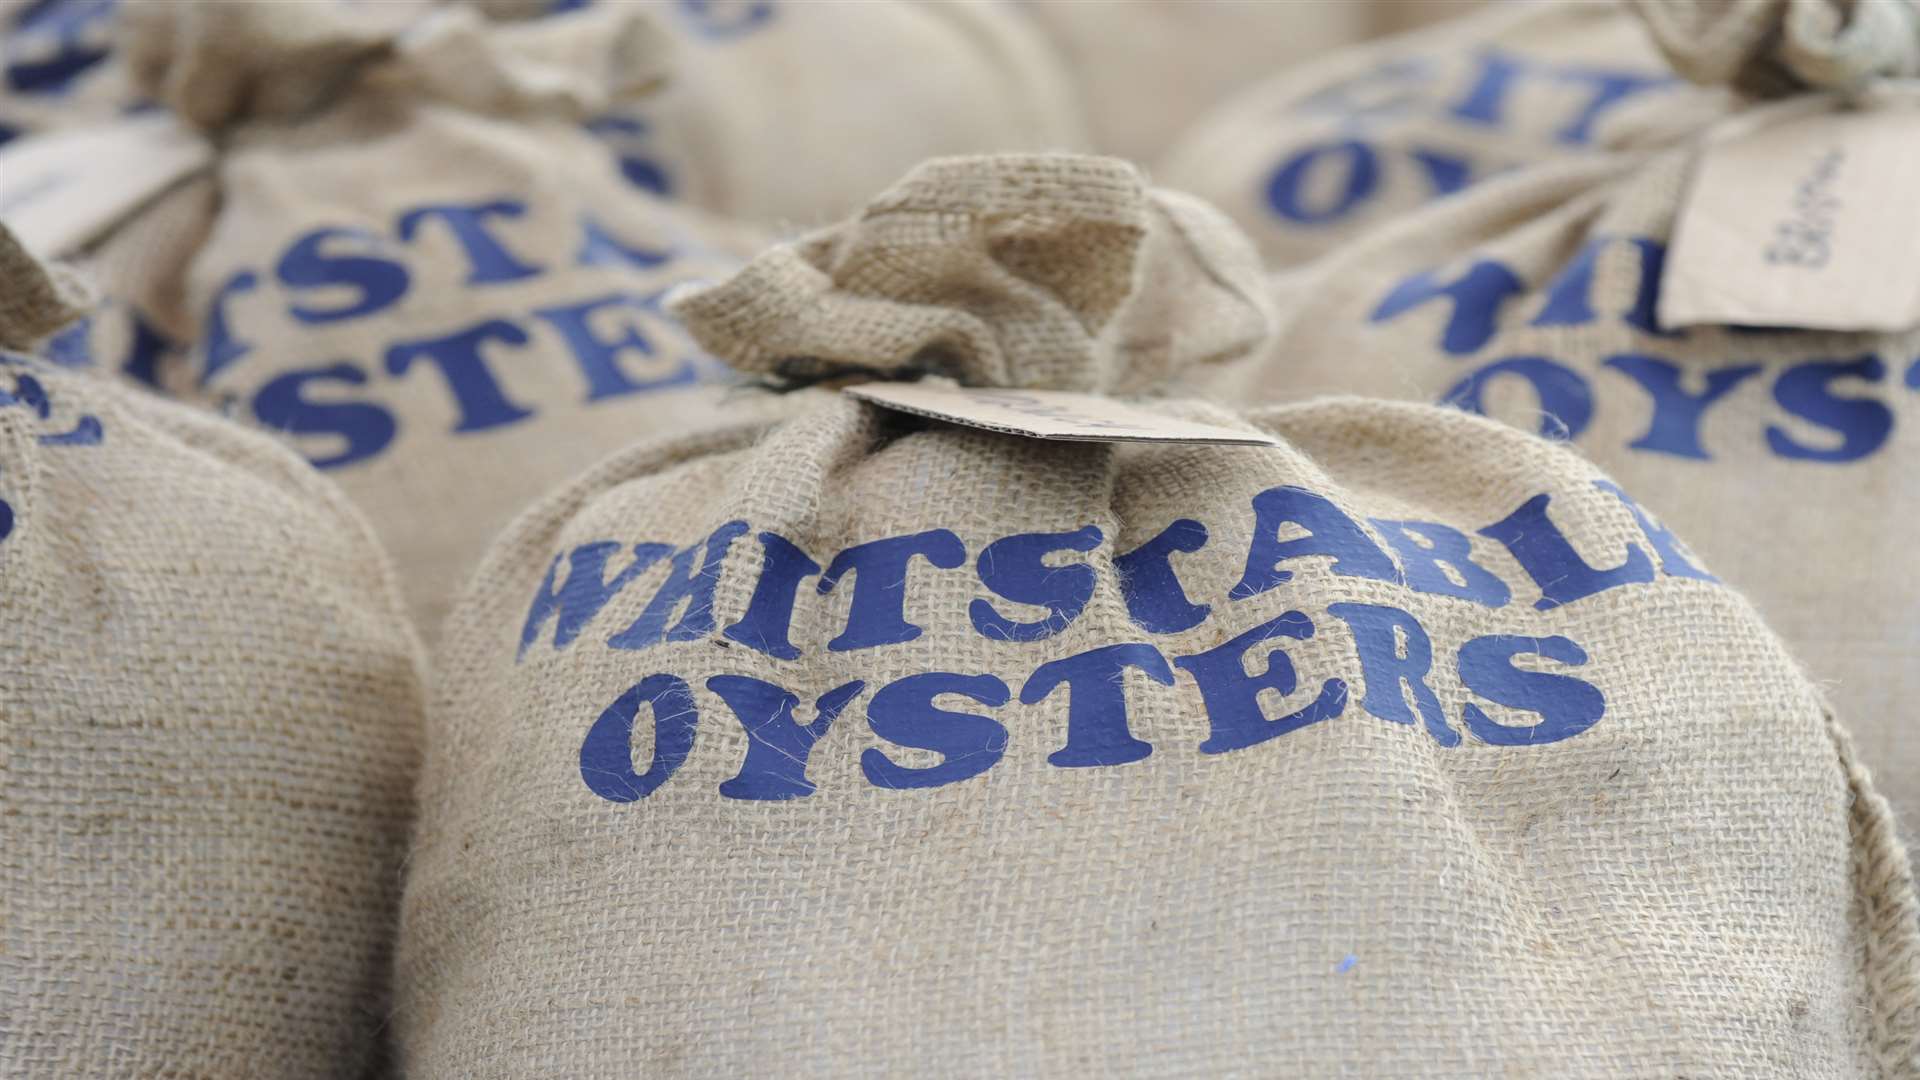 Whitstable oysters ready for sale